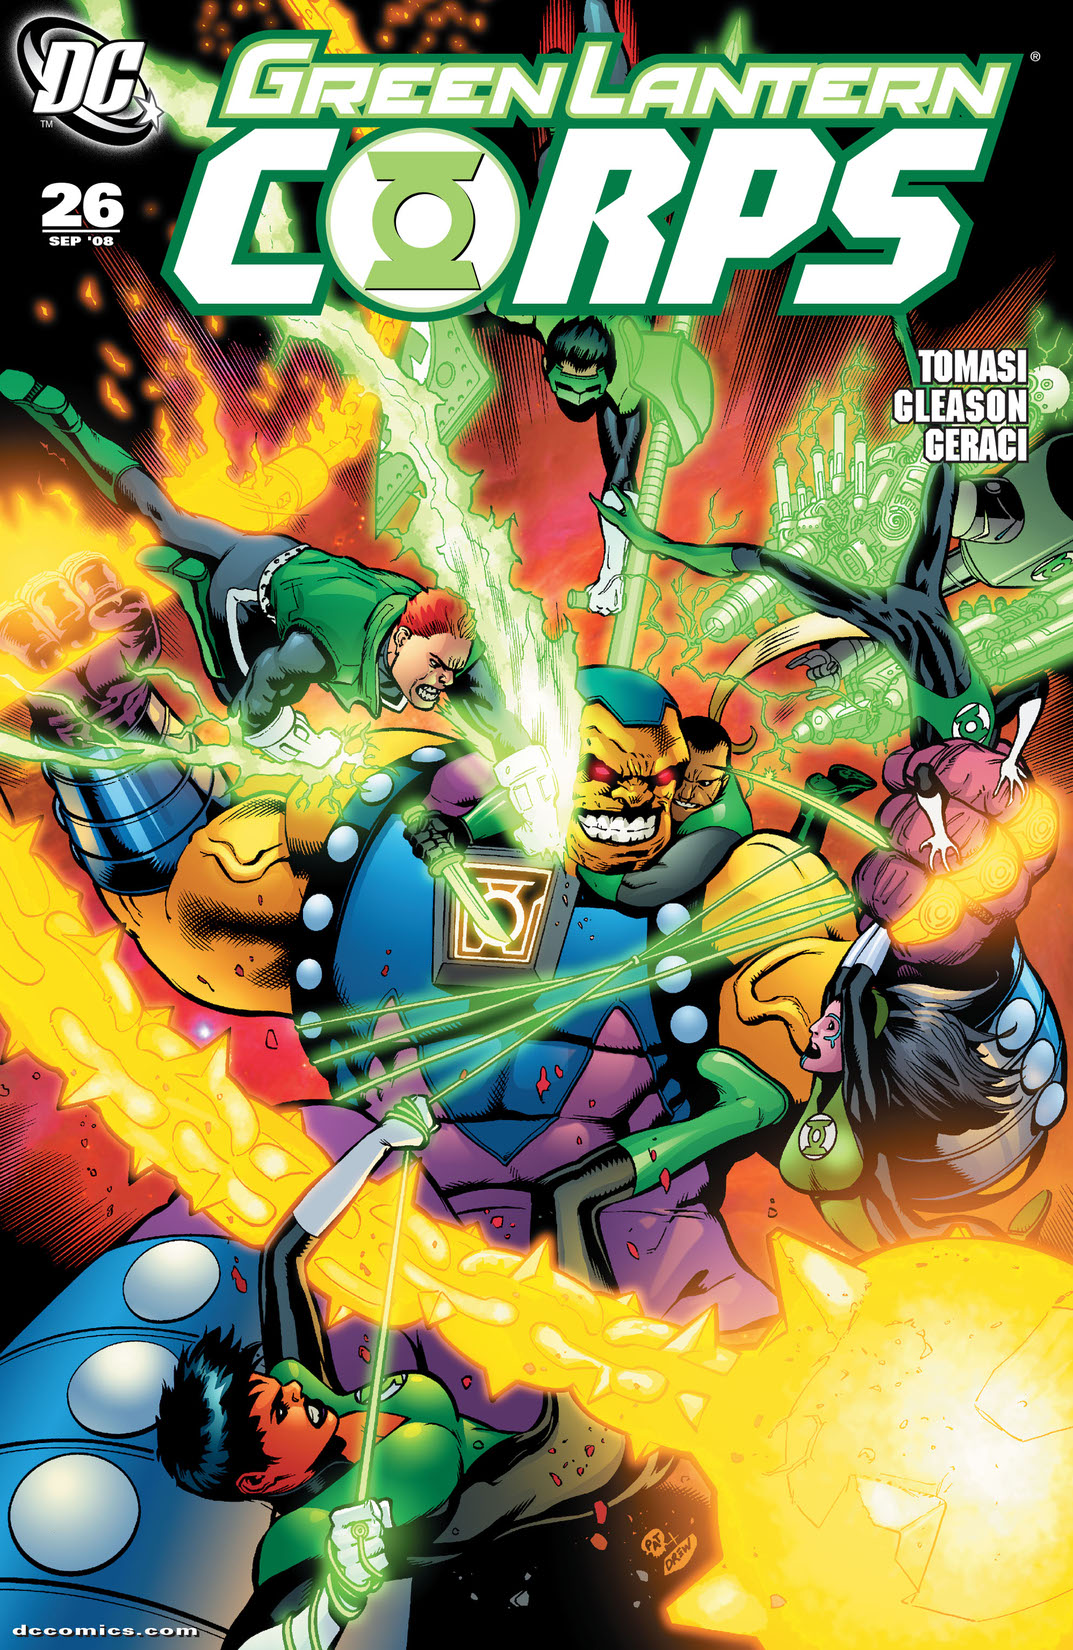 Green Lantern Corps (2006-) #26 preview images